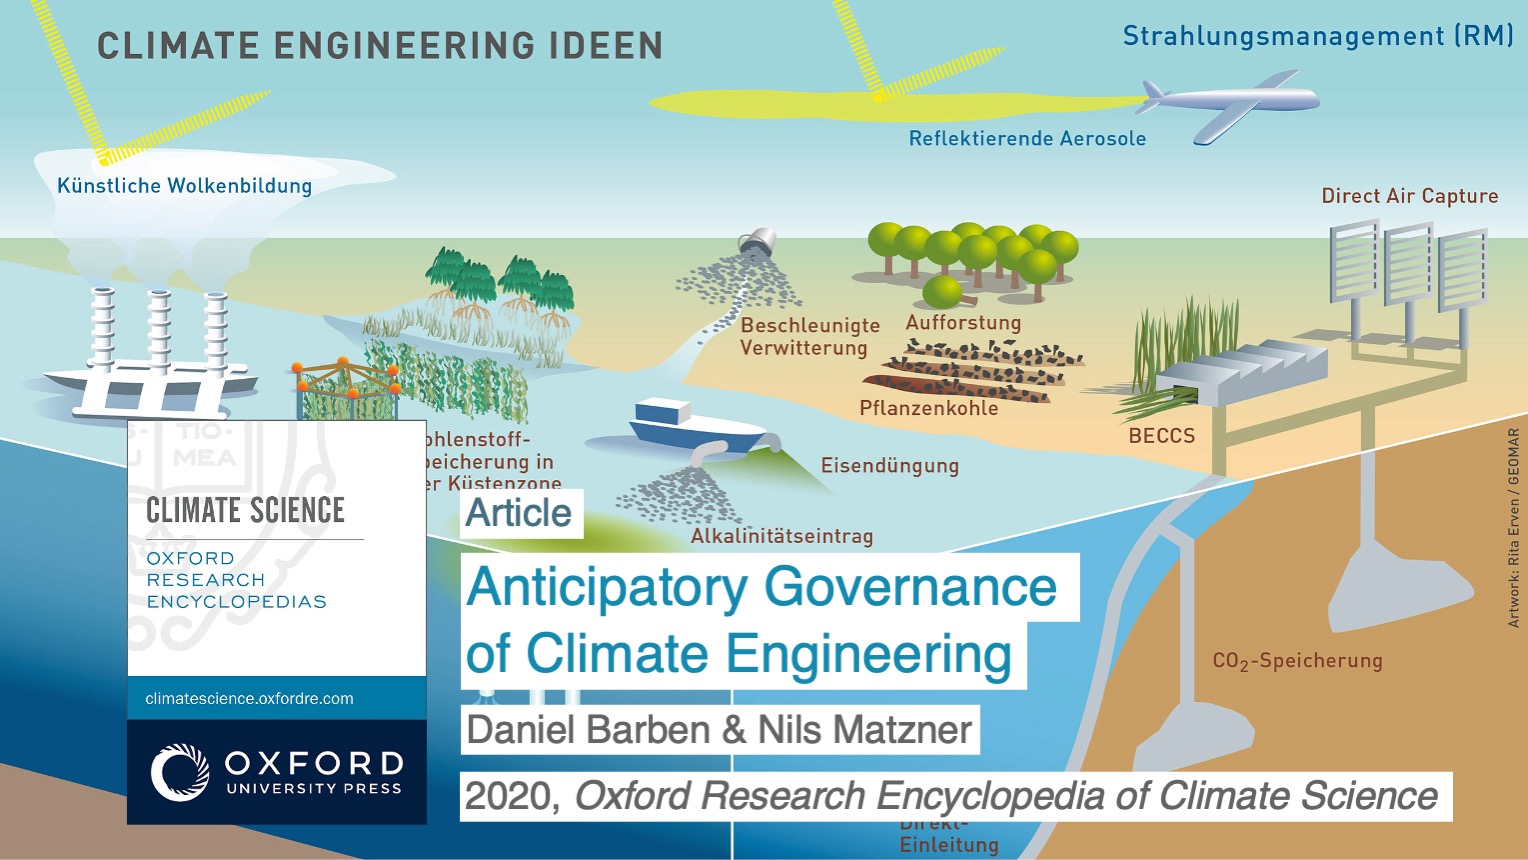 Daniel Barben, Nils Matzner: Anticipatory Governance of Climate Engineering. 2020, Oxford Research Encyclopedia of Climate Science.